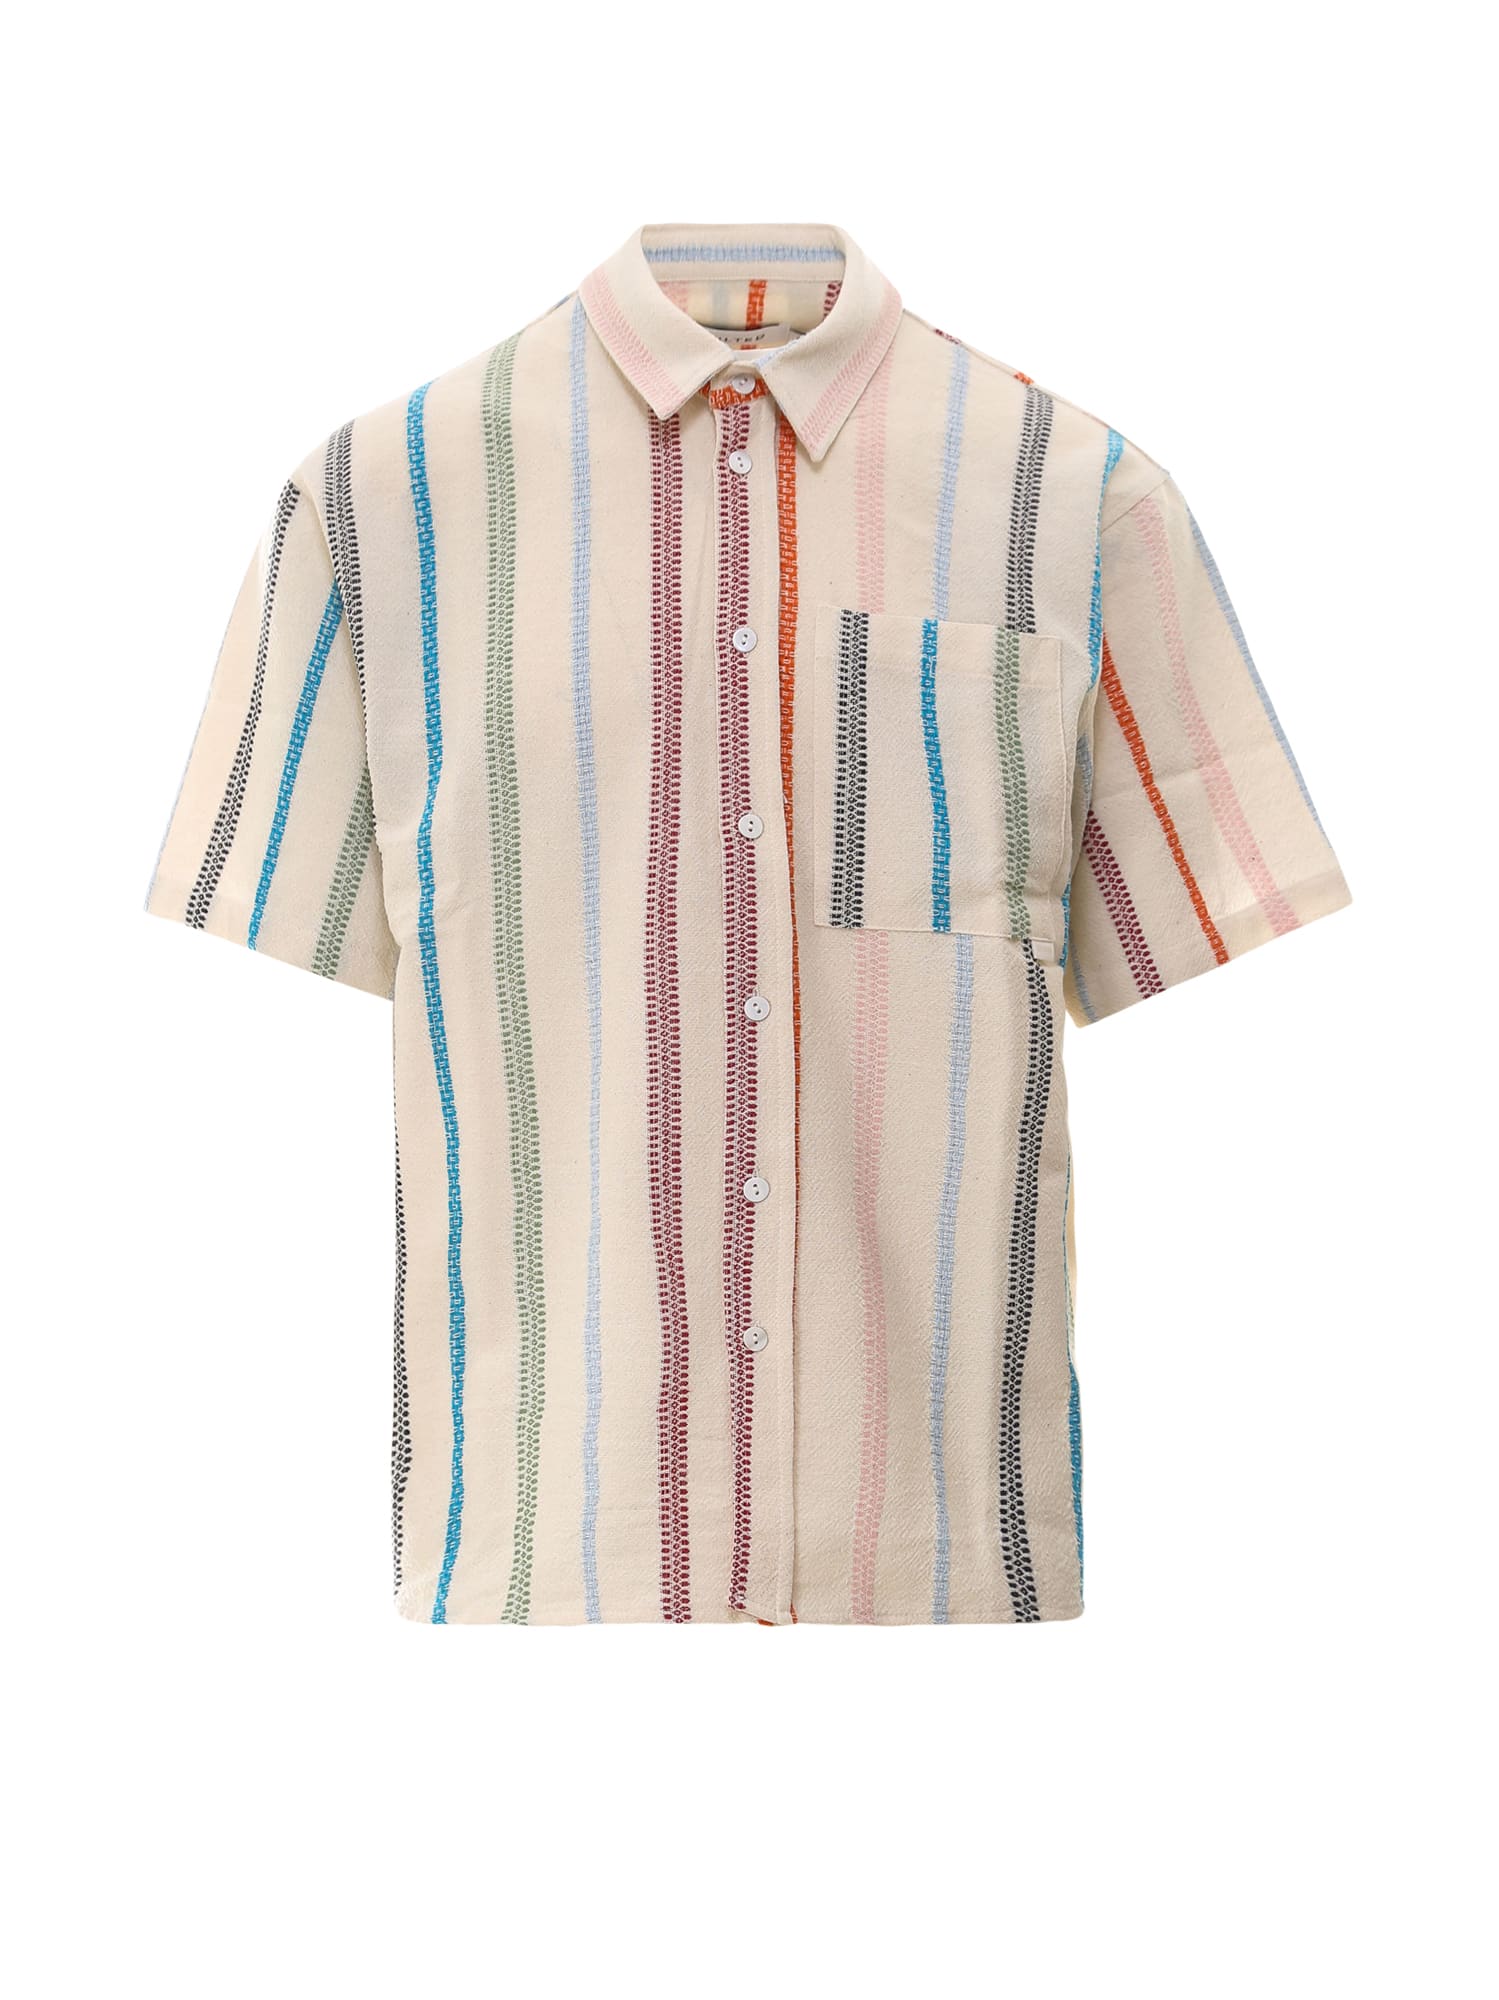 THE SILTED COMPANY SHIRT,SSKPWH MULTICOLO